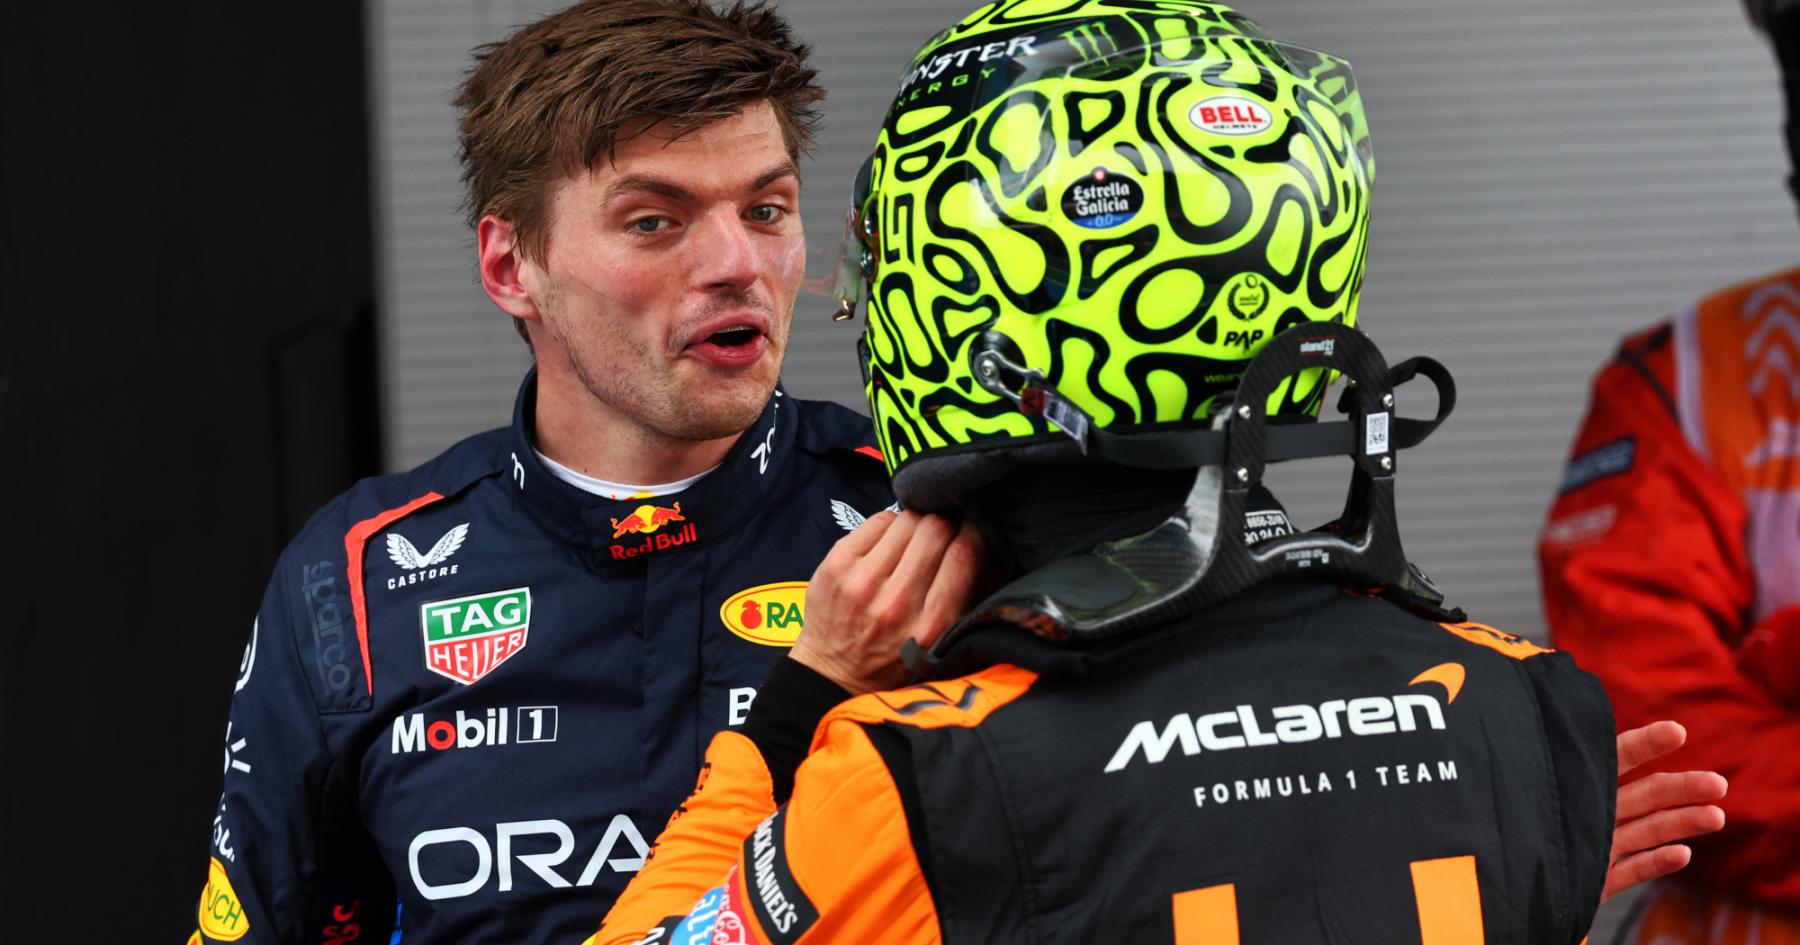 Verstappen gracefully concedes pole position, while issuing a caution to Norris